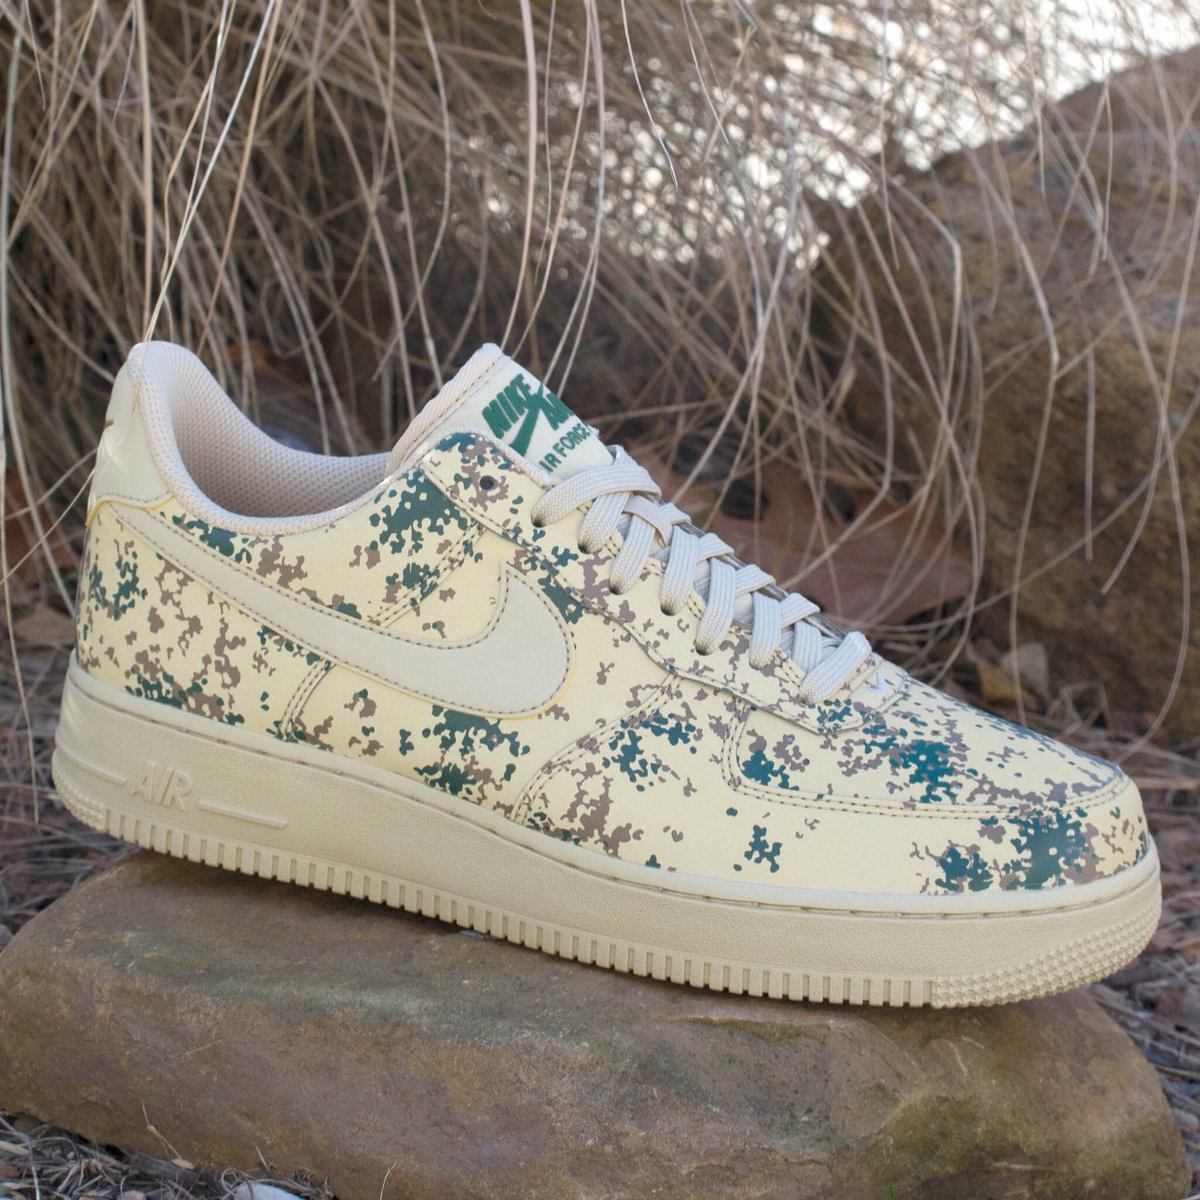 NIKE AIR FORCE 1 '07 LV8 'COUNTRY CAMO 